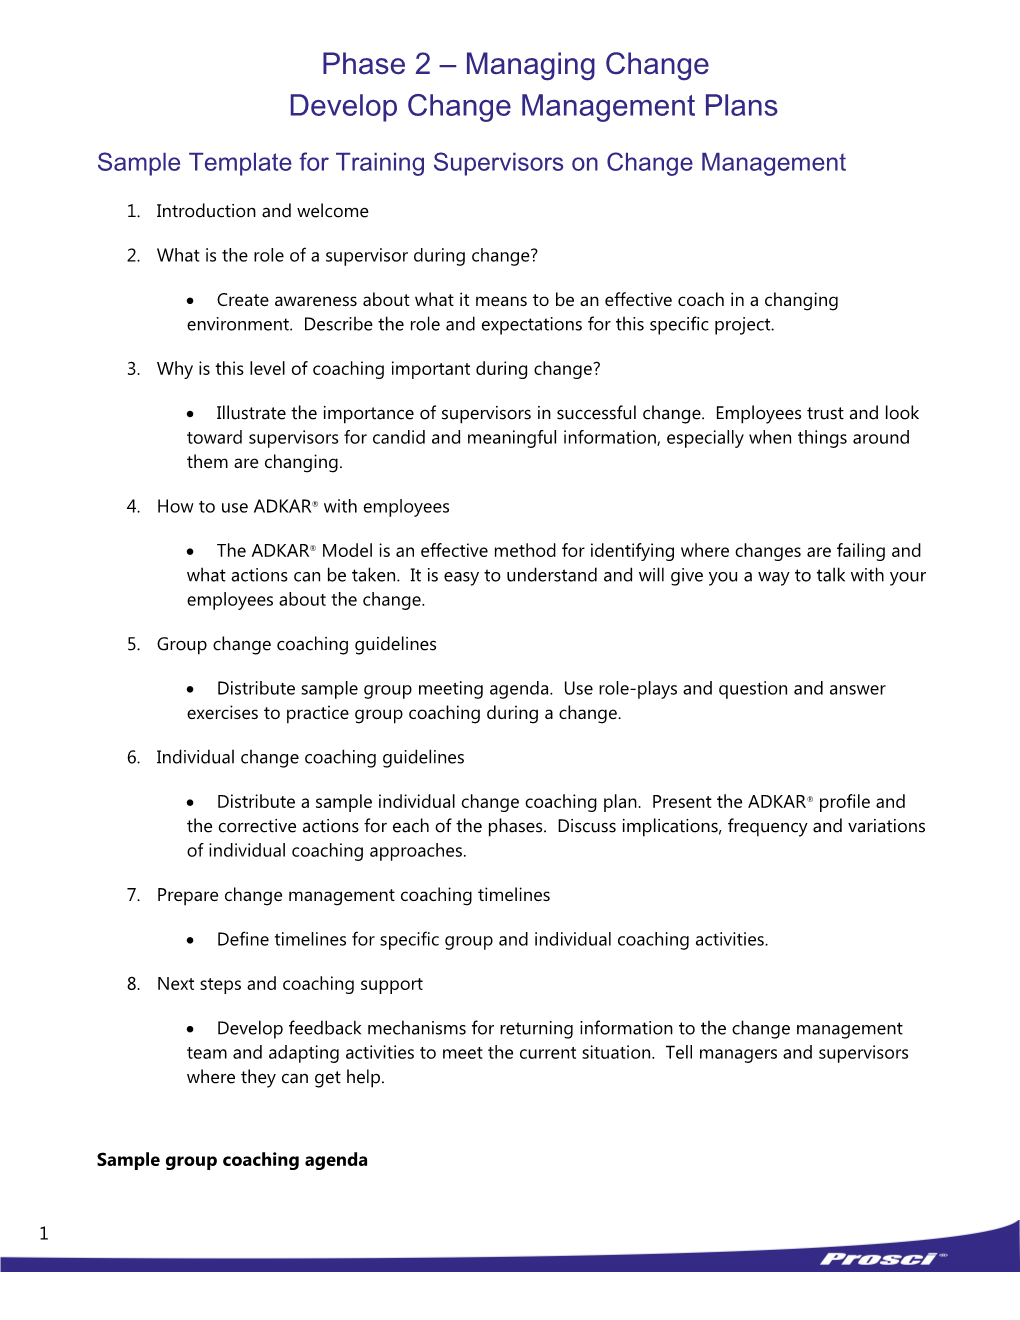 Phase 2 Managing Changedevelop Change Management Plans s1